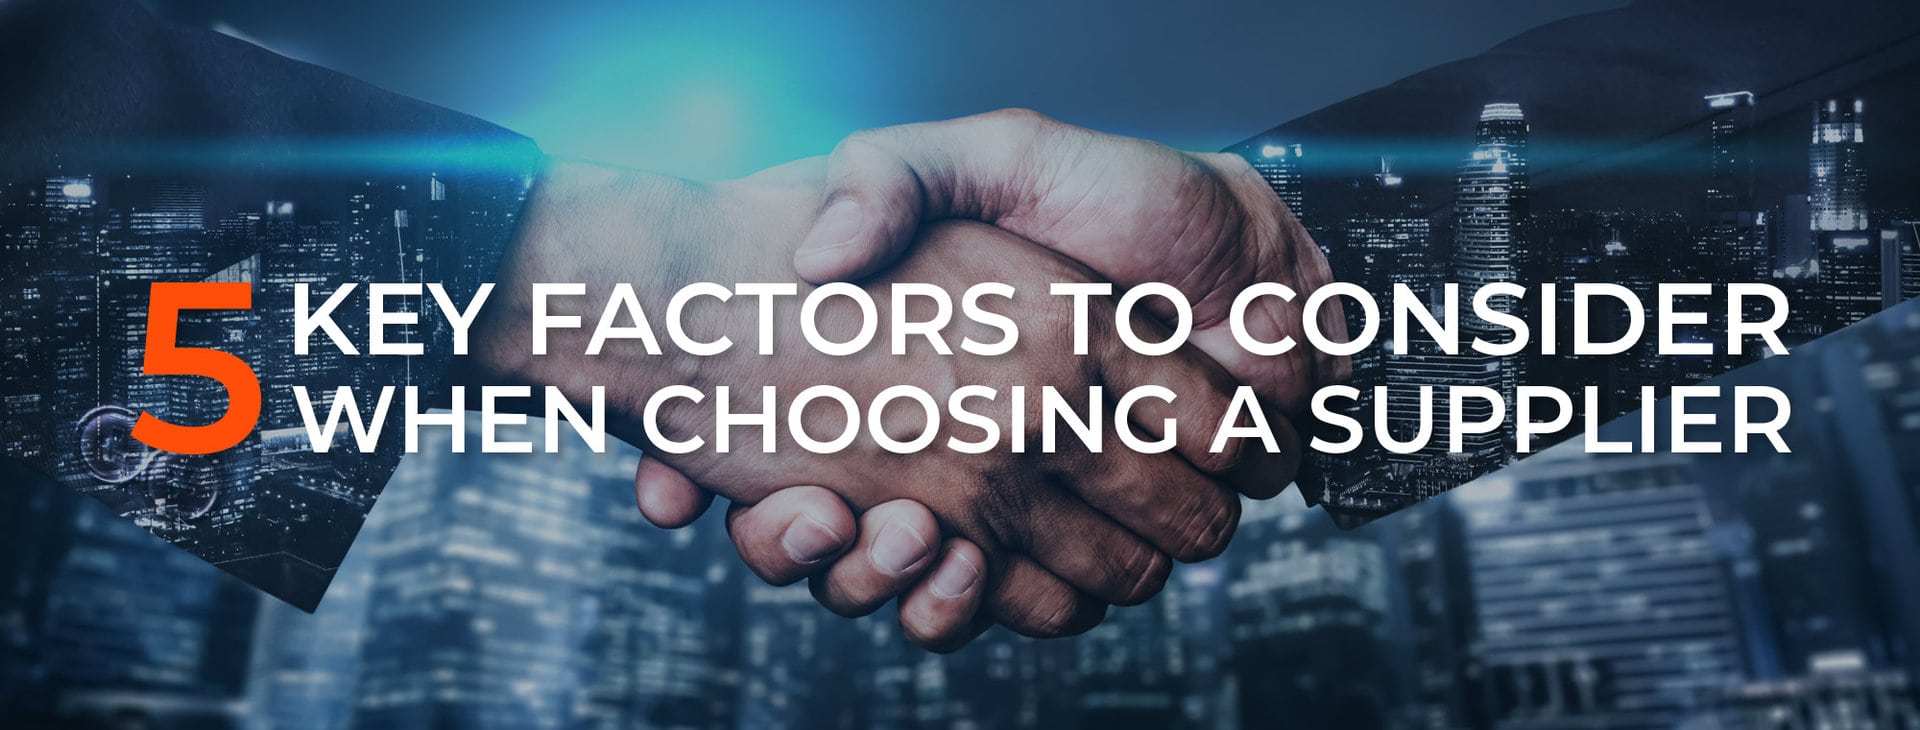 5 Key Factors to Consider When Choosing a Supplier